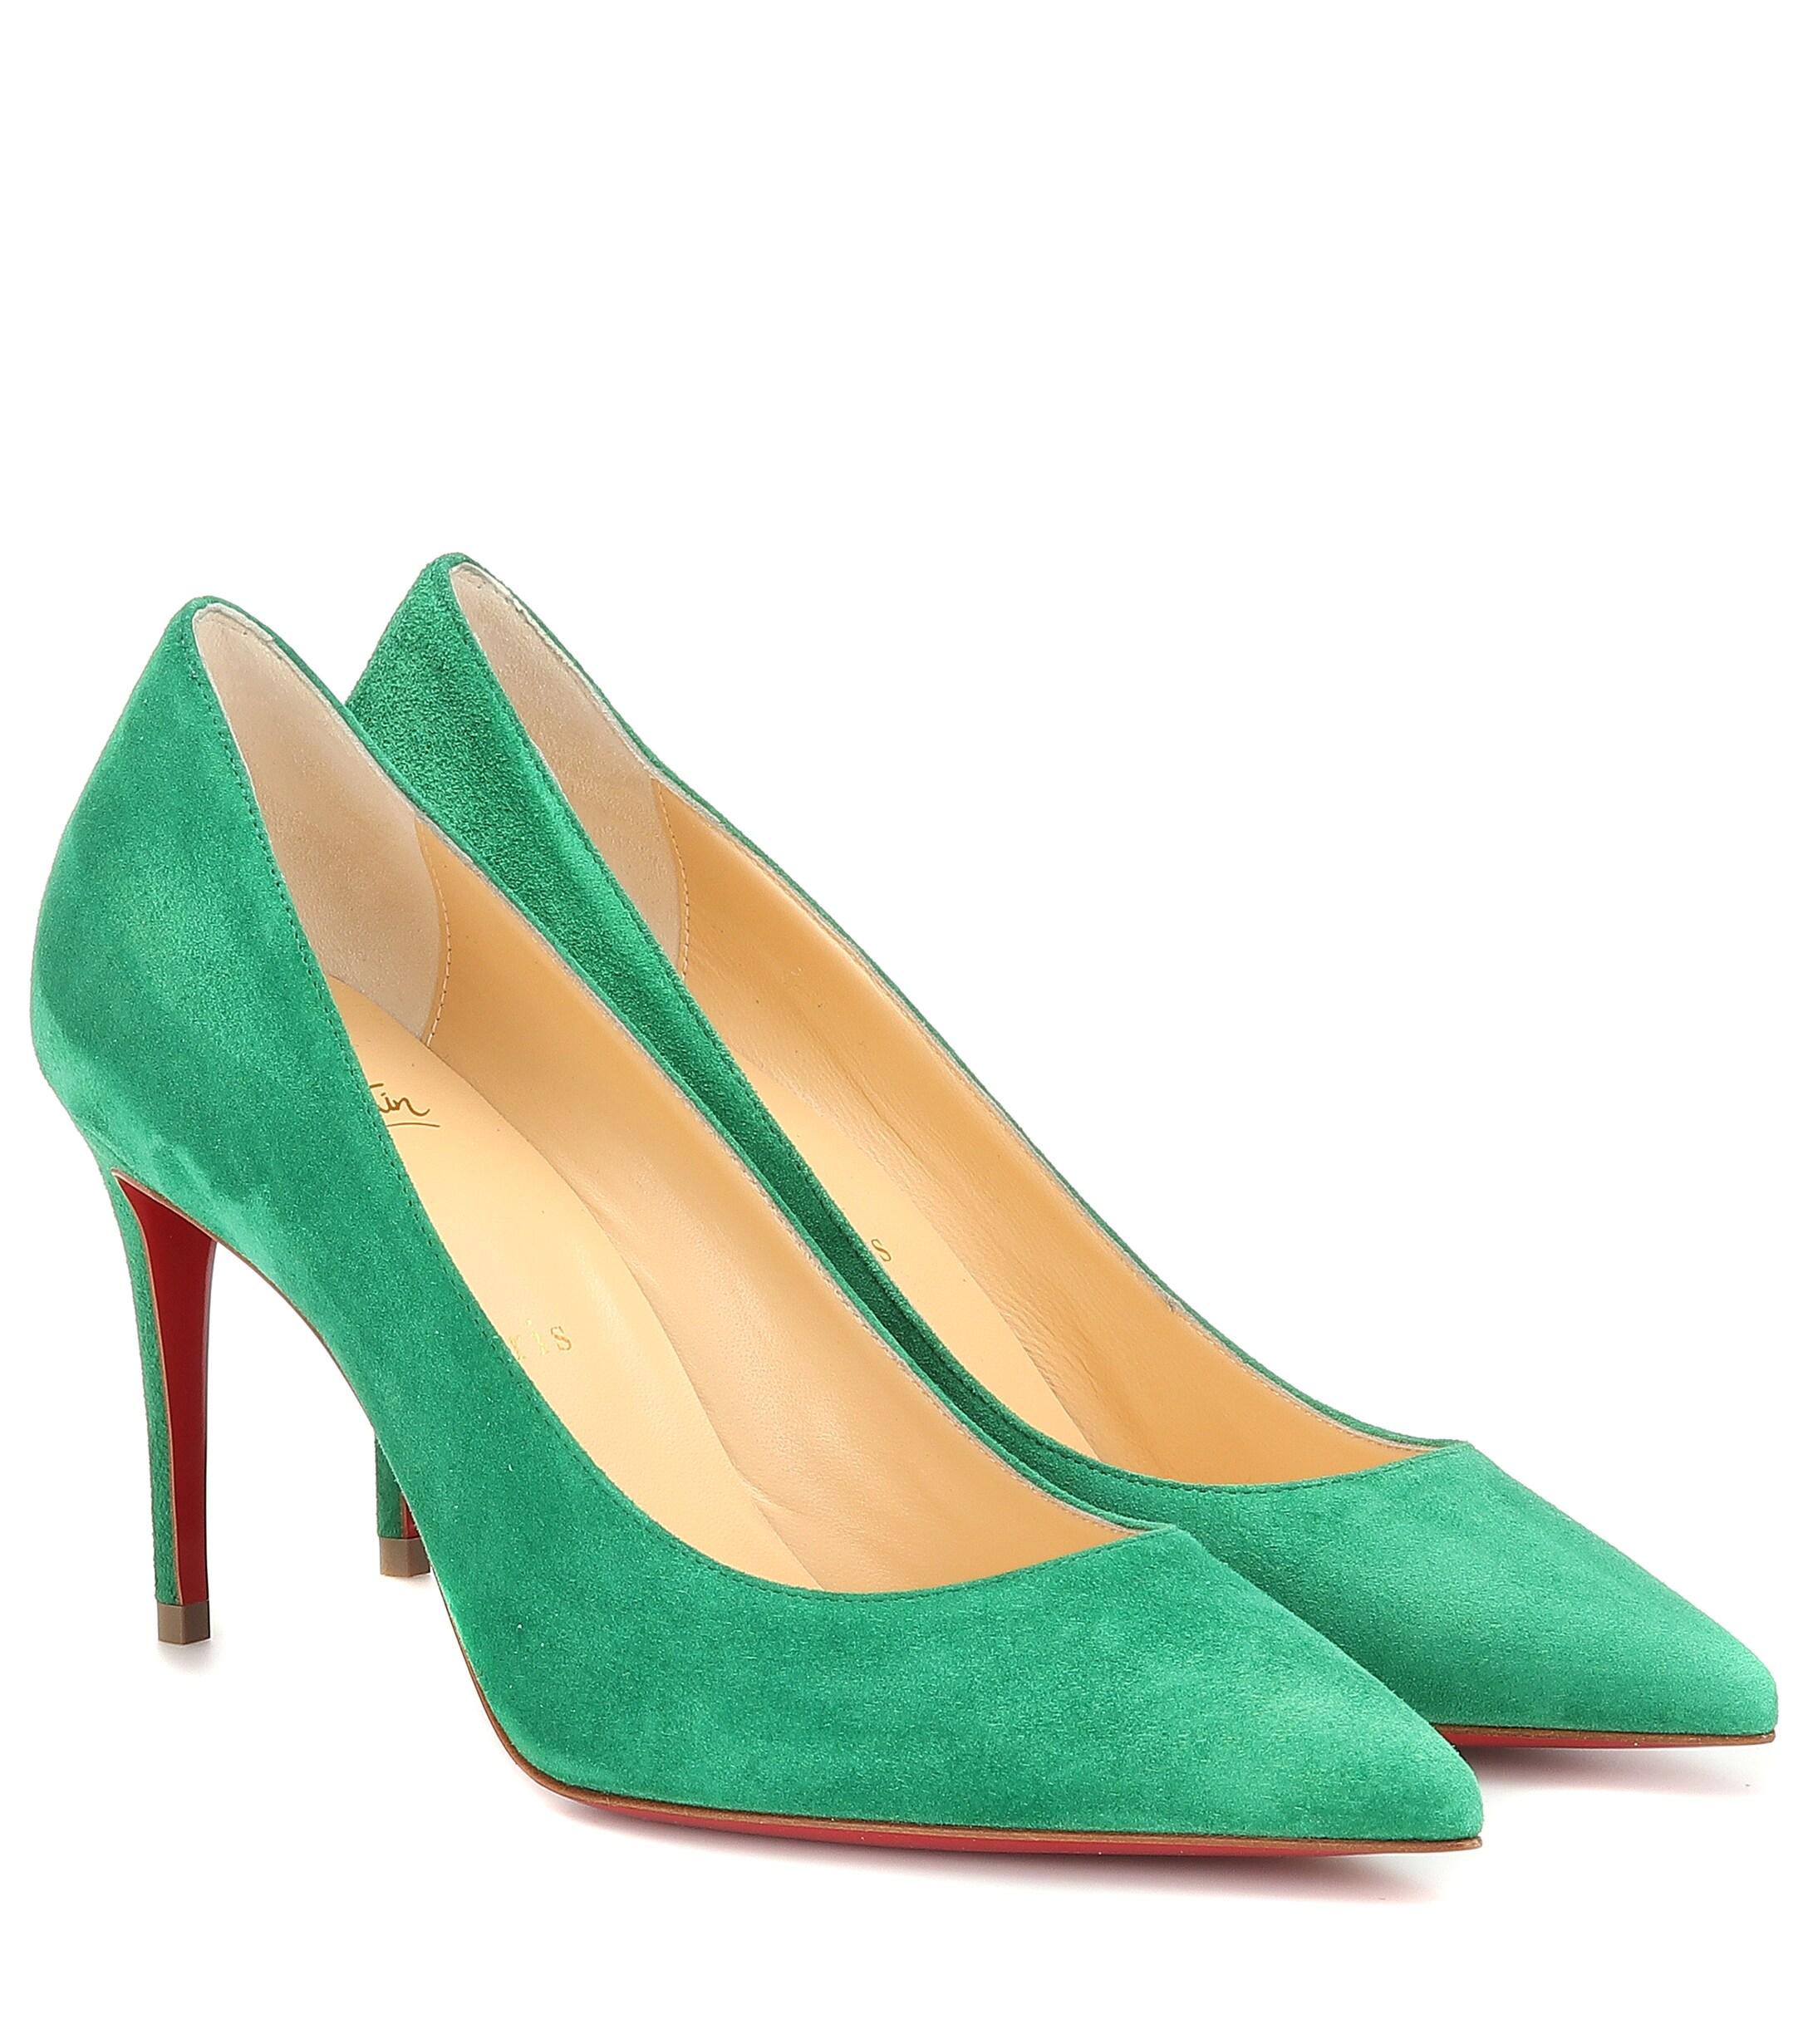 Christian Louboutin Kate 85 Suede Pumps in Green - Lyst